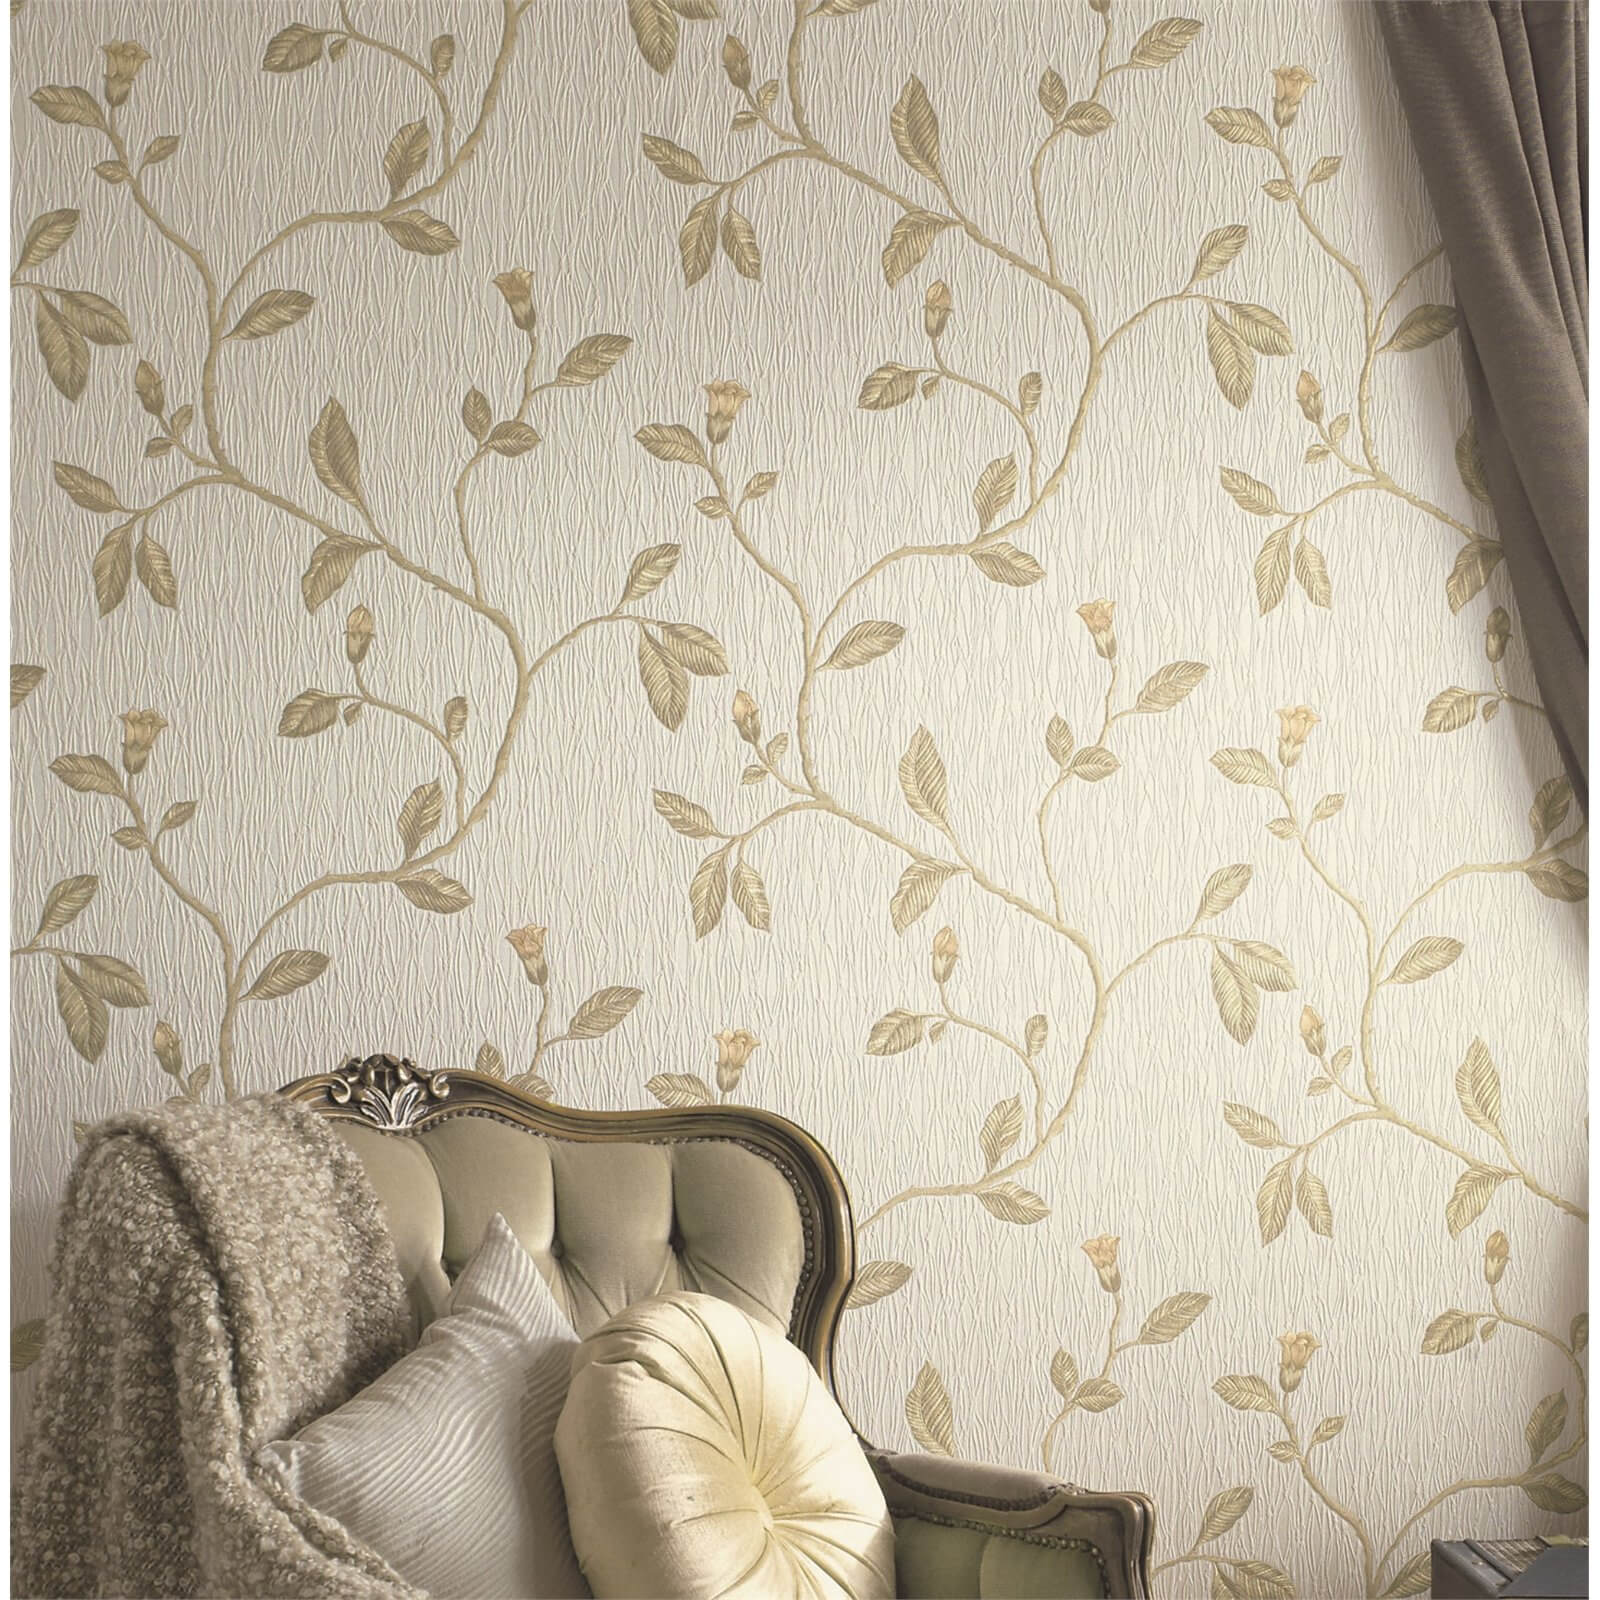 Holden Decor Lia Floral Textured  Yellow and Beige Wallpaper